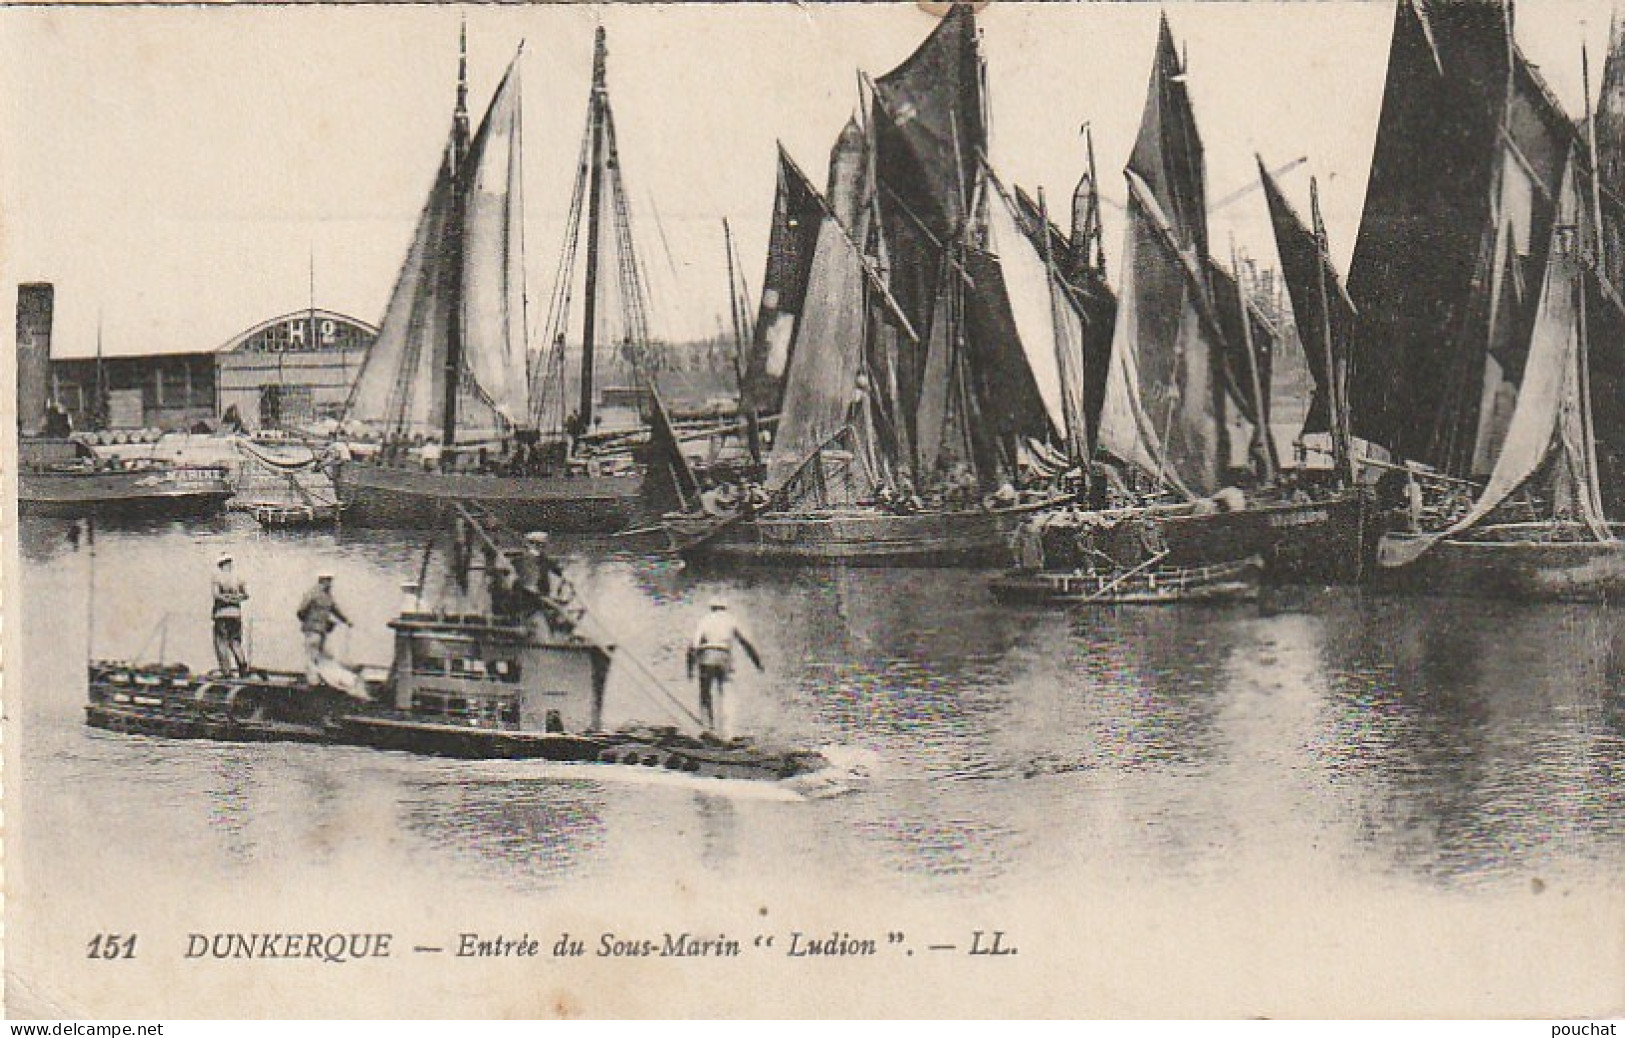 ZY 79-(59) DUNKERQUE - ENTREE DU SOUS MARIN " LUDION " - 2 SCANS - Dunkerque